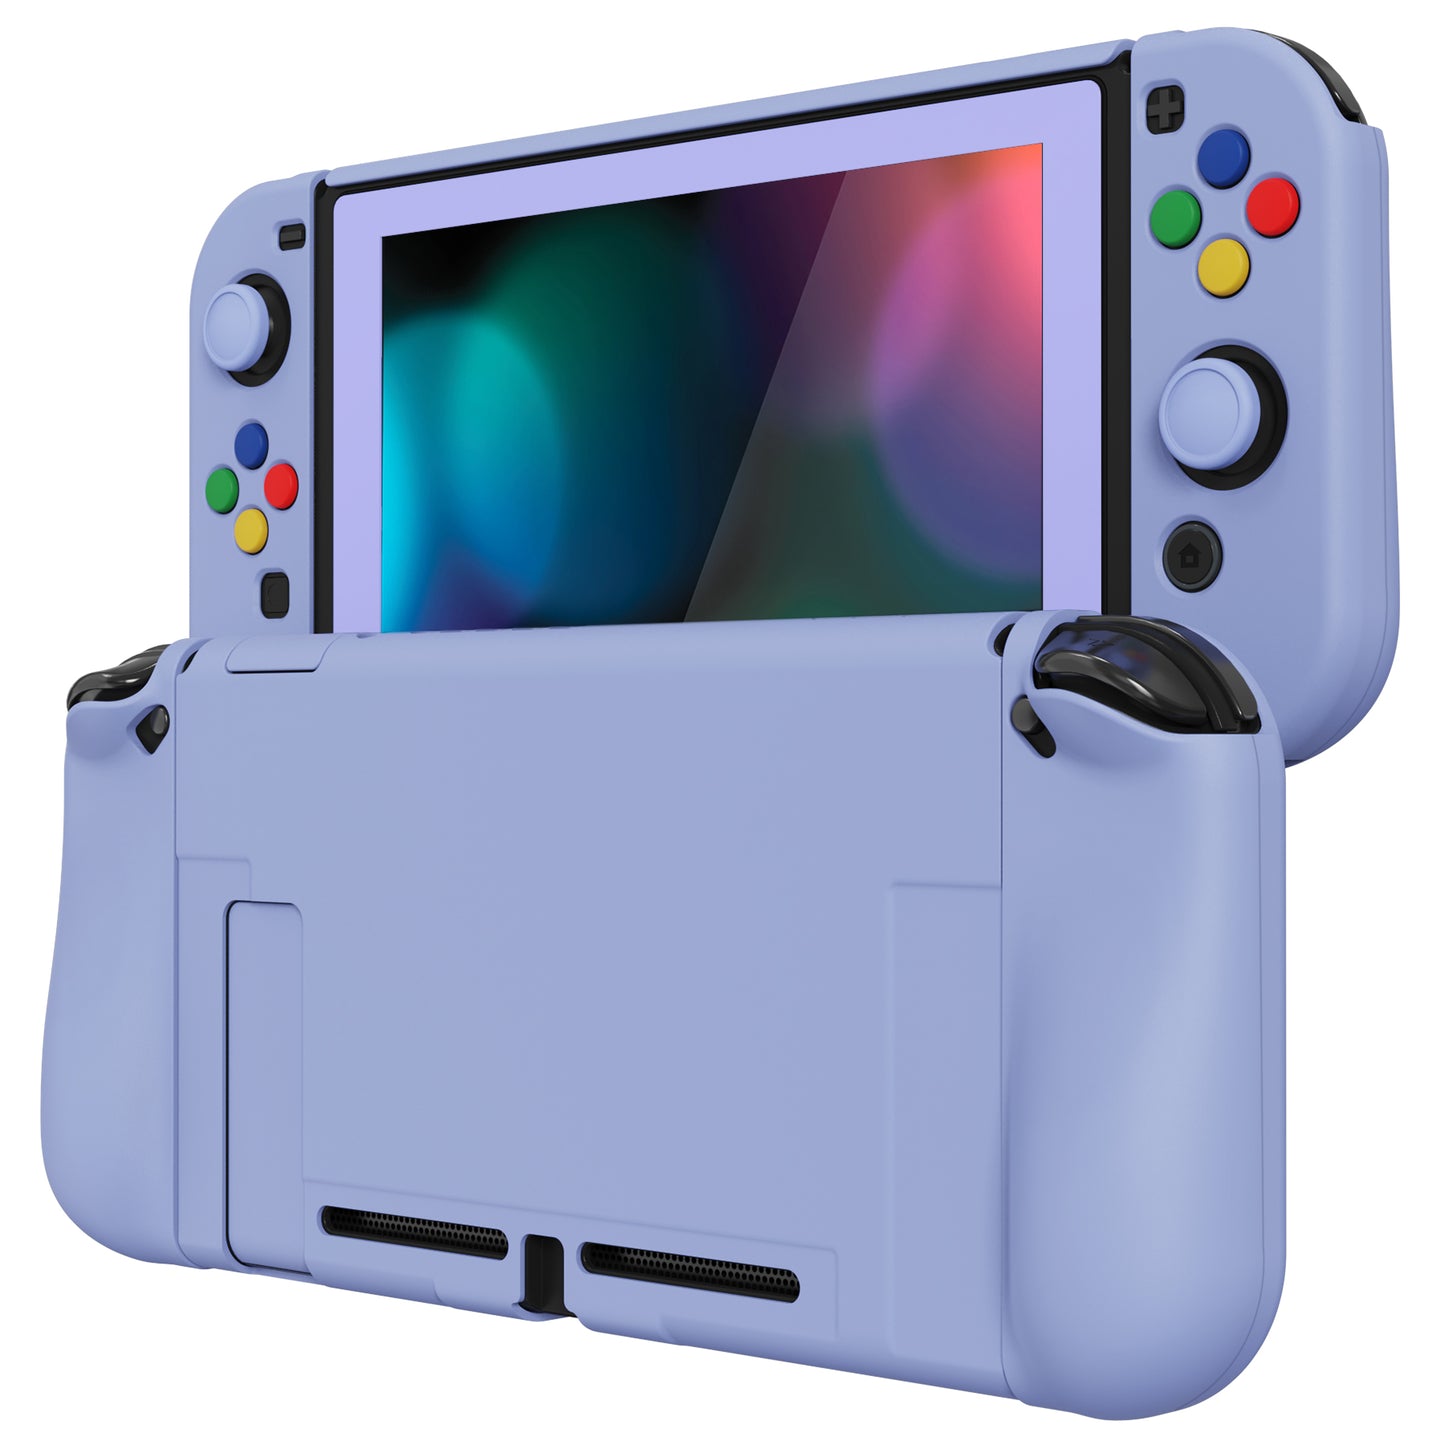 PlayVital AlterGrips Dockable Protective Case Ergonomic Grip Cover for Nintendo Switch, Interchangeable Joycon Cover w/Screen Protector & Thumb Grip Caps & Button Caps - Light Violet - TNSYP3008 playvital